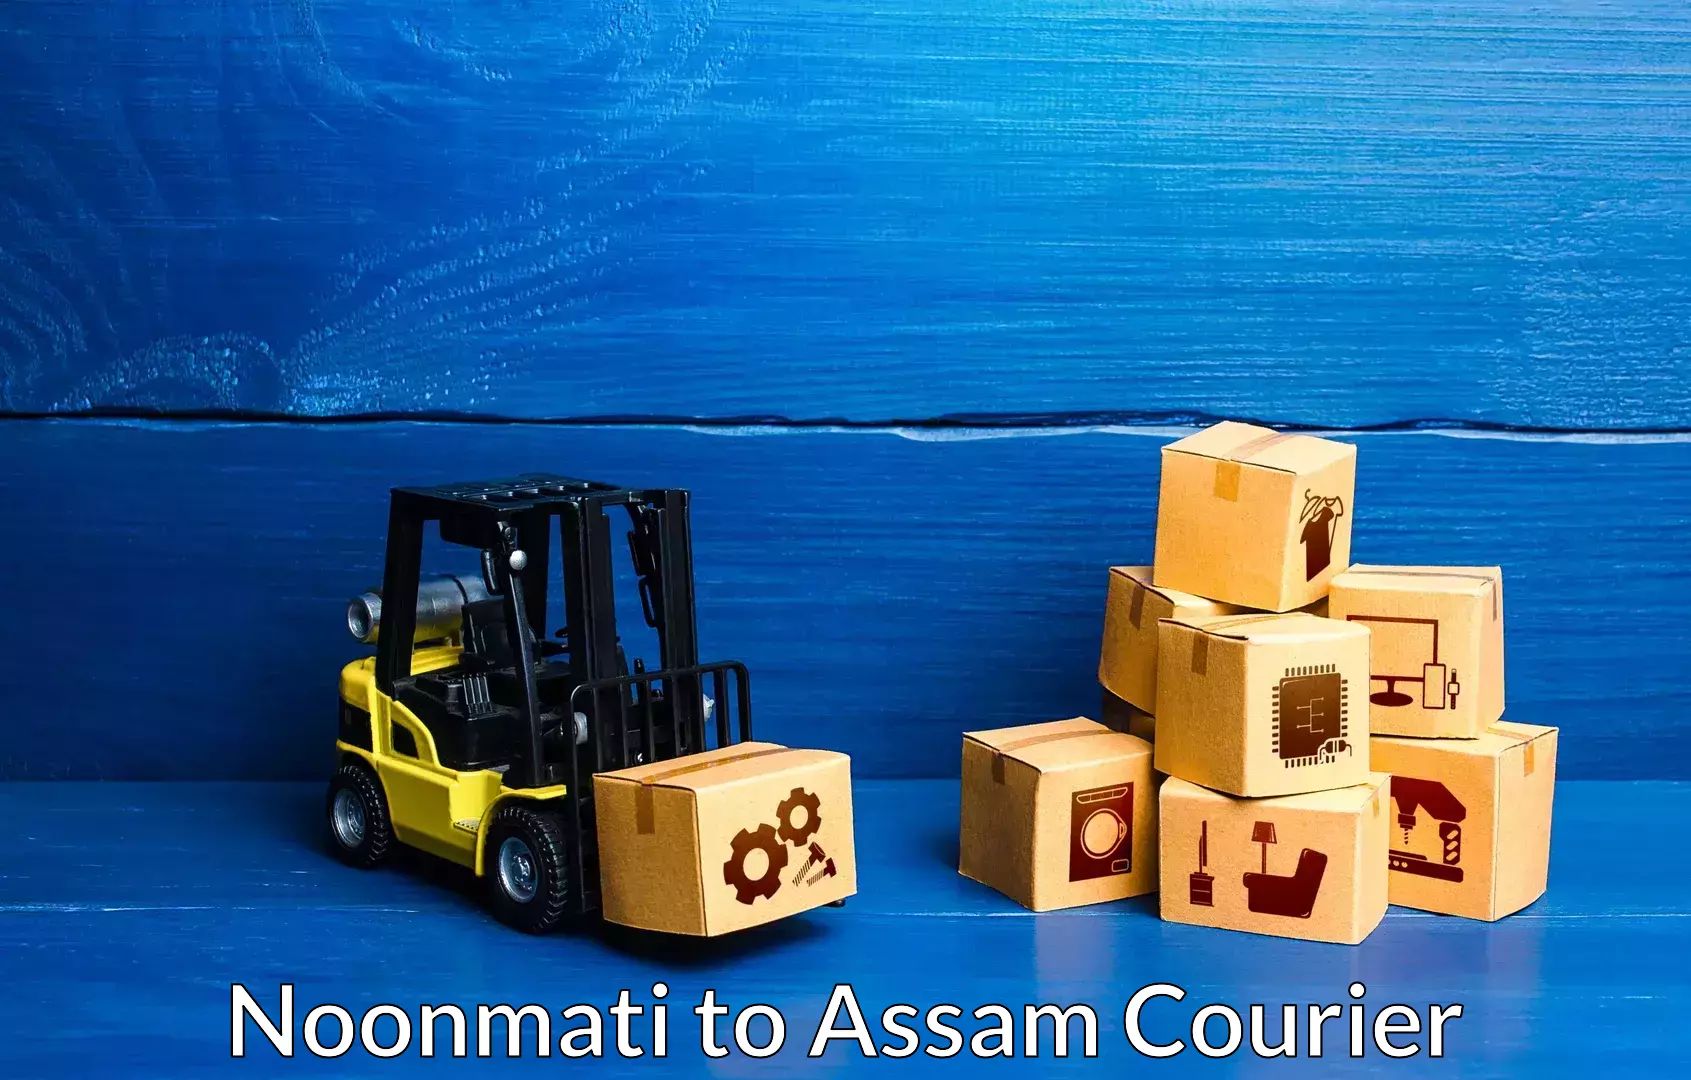 Trusted moving company Noonmati to Assam